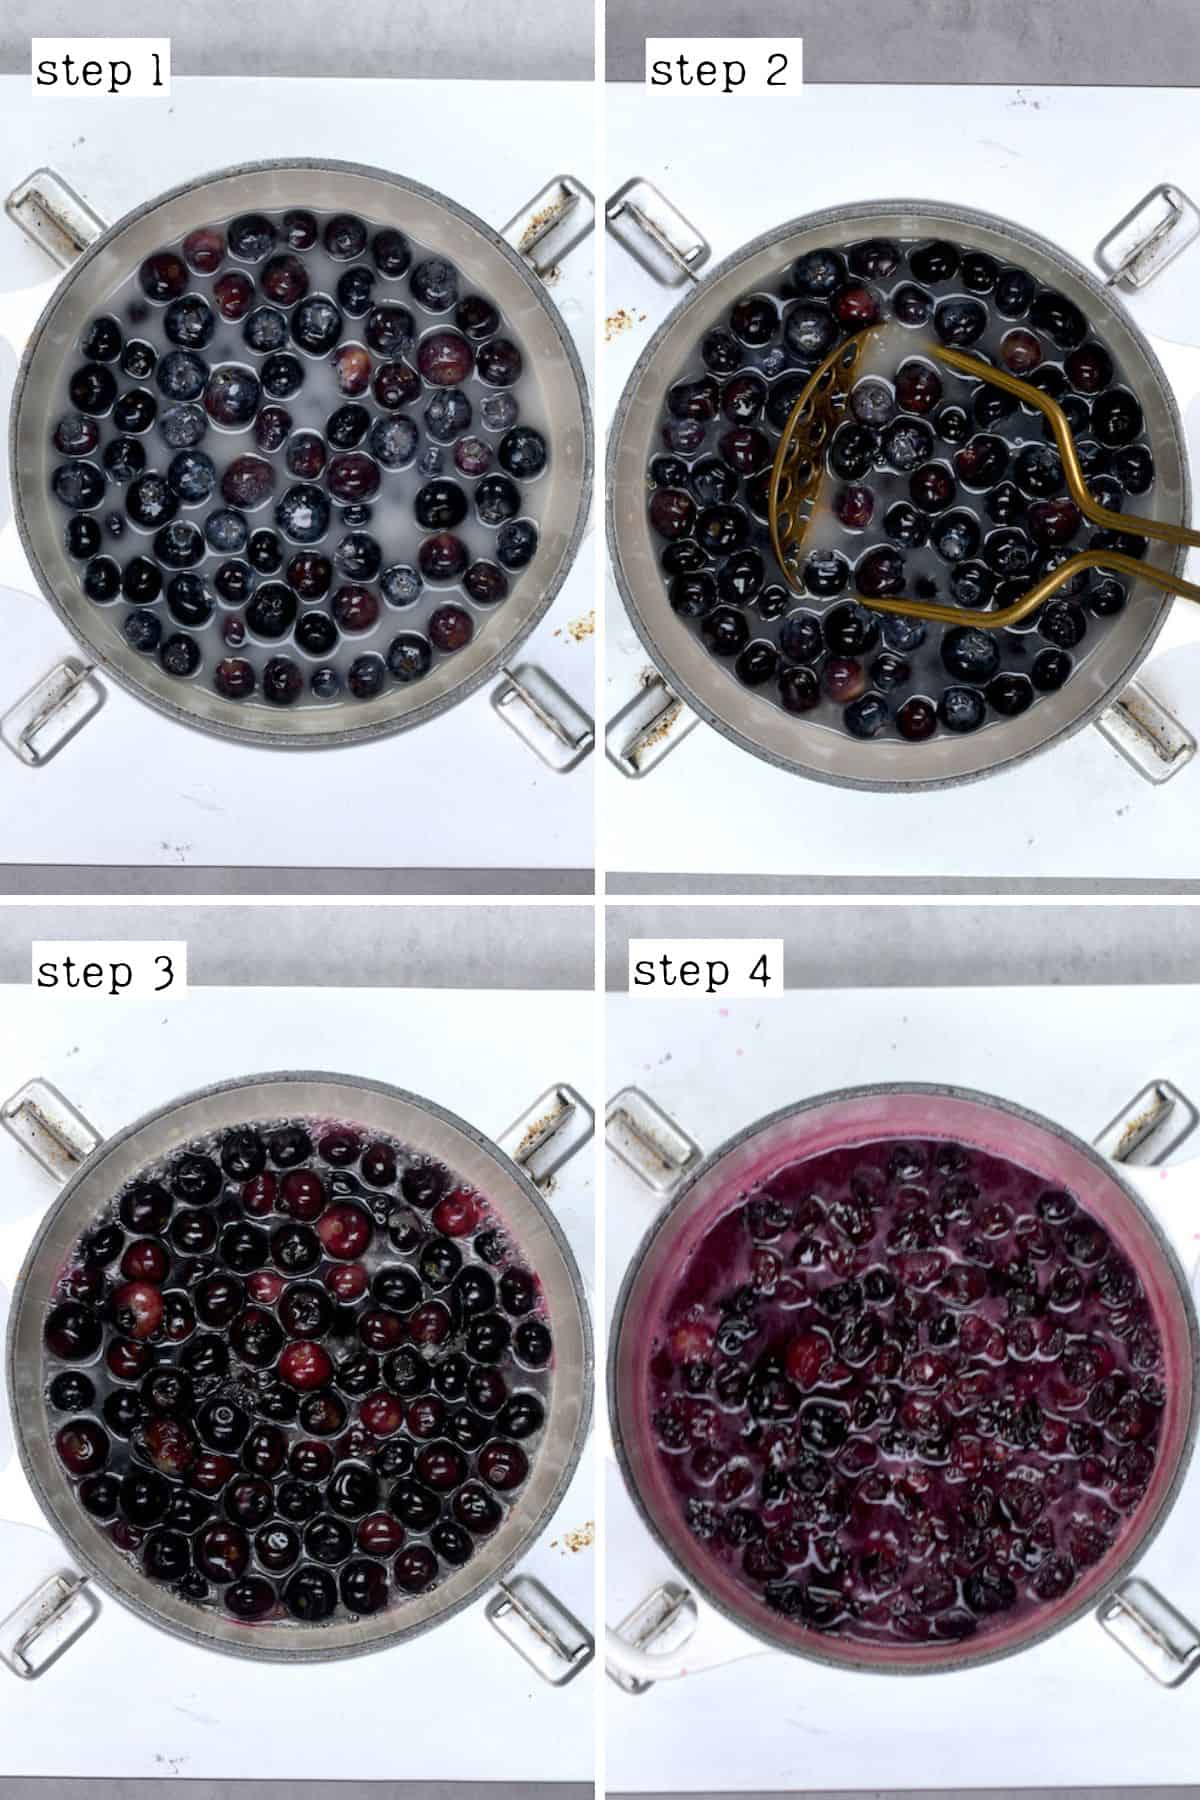 Steps for making blueberry syrup